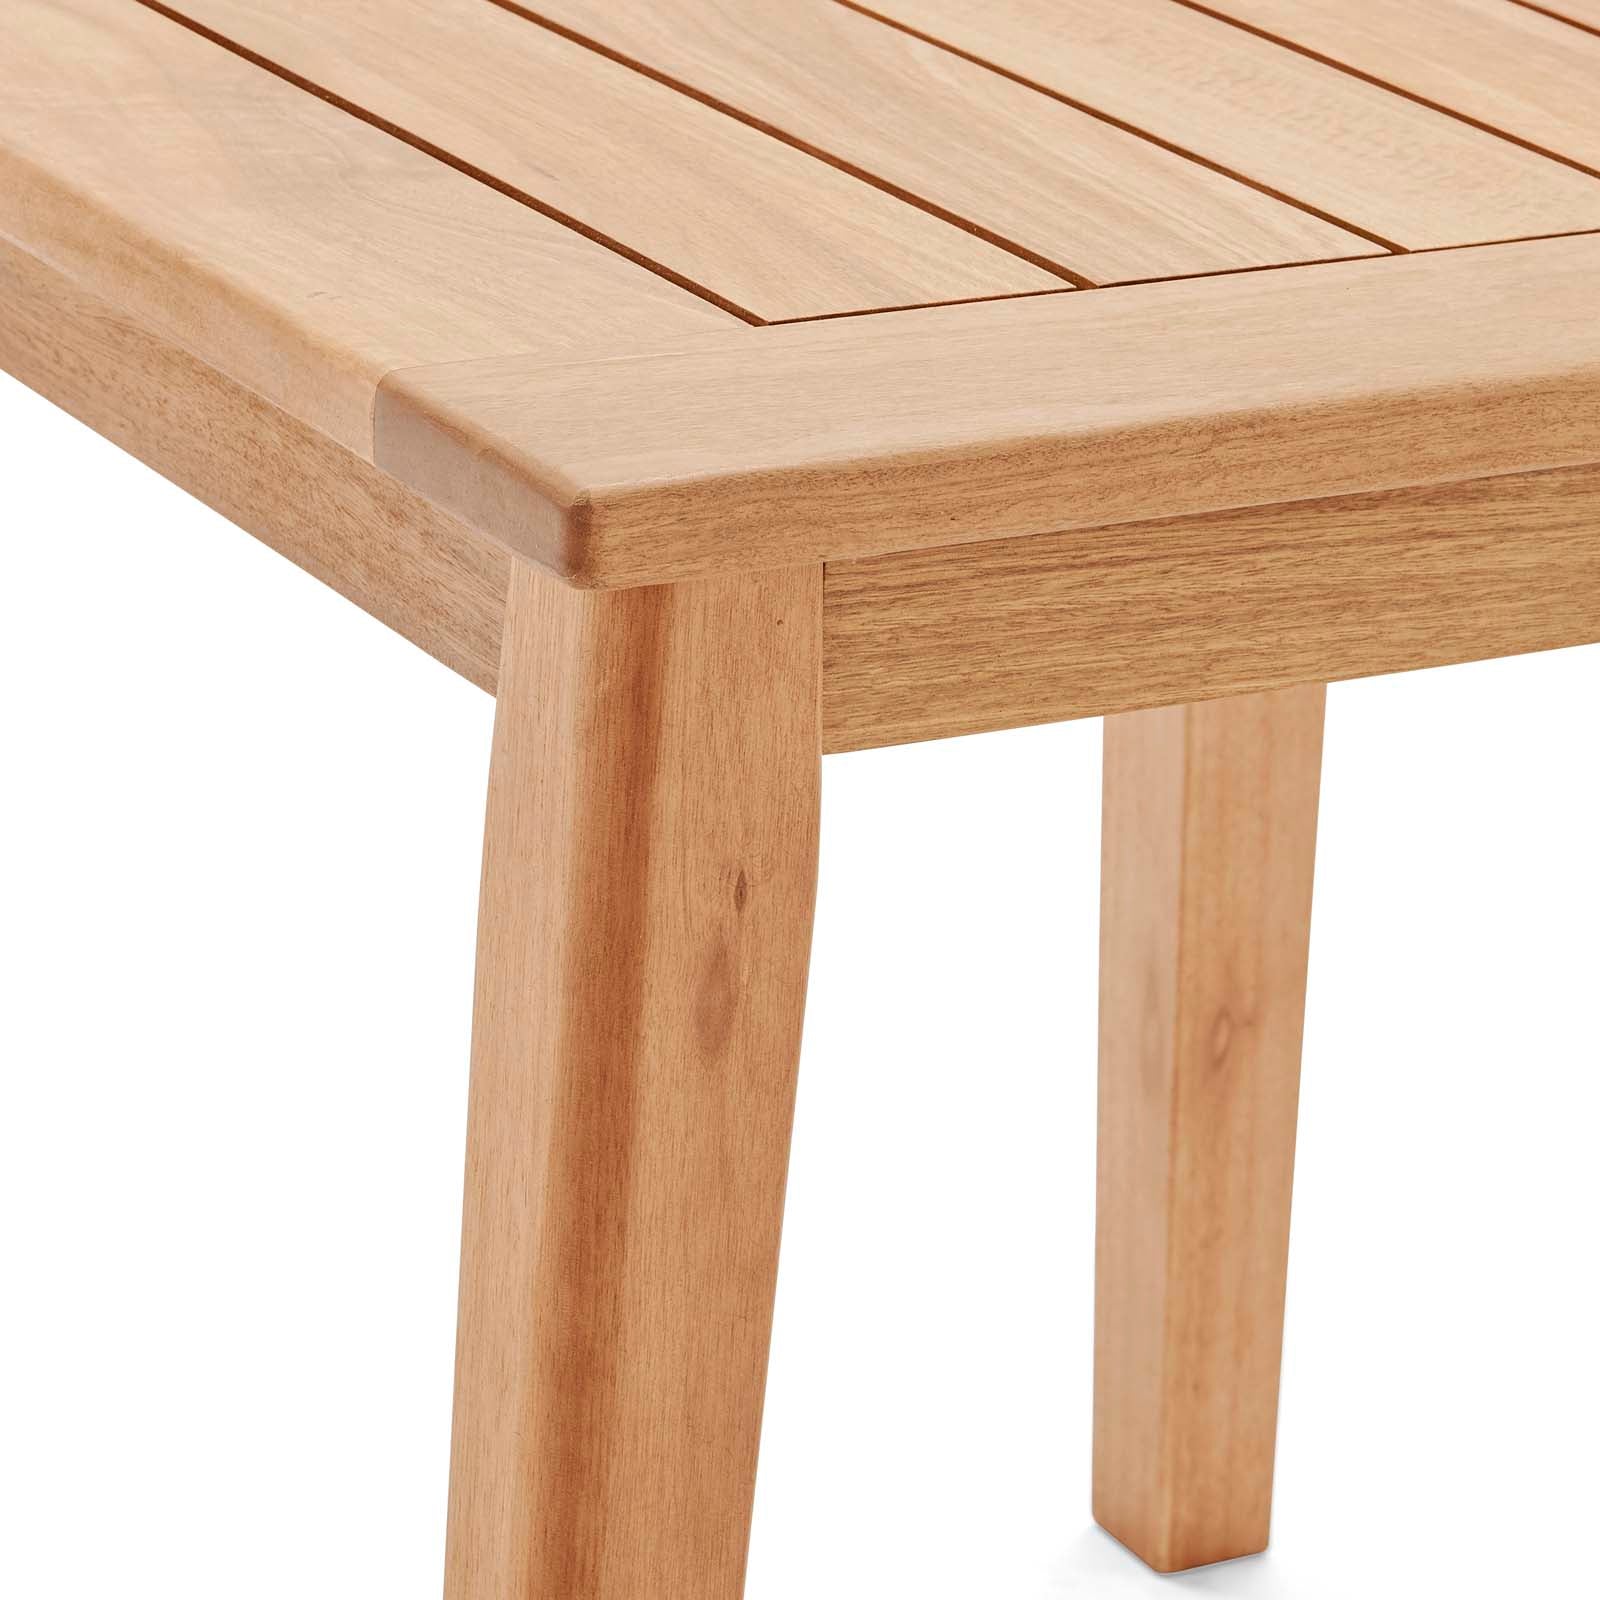 Viewscape Outdoor Patio Ash Wood End Table